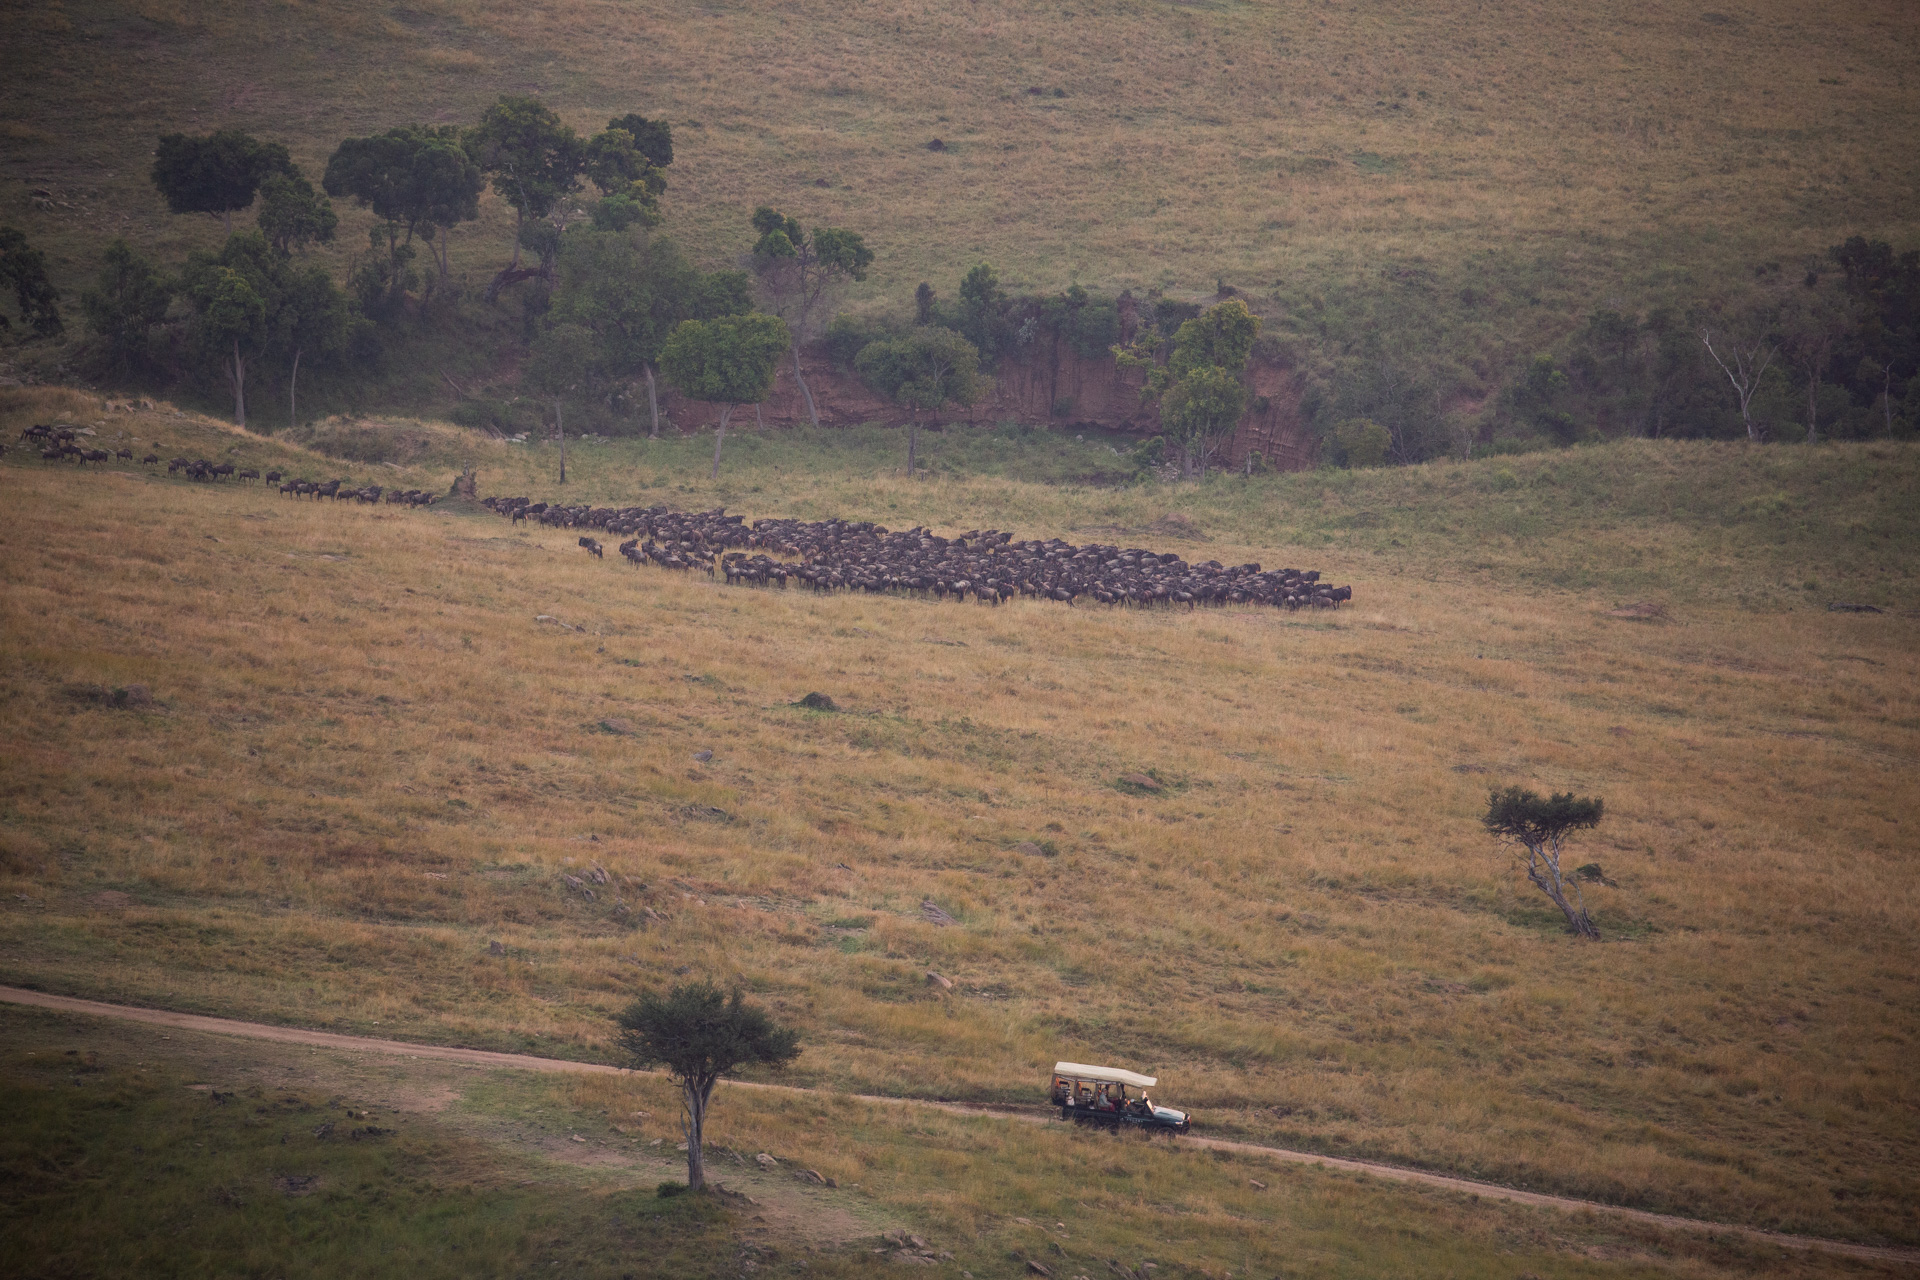 car and wildebeest 